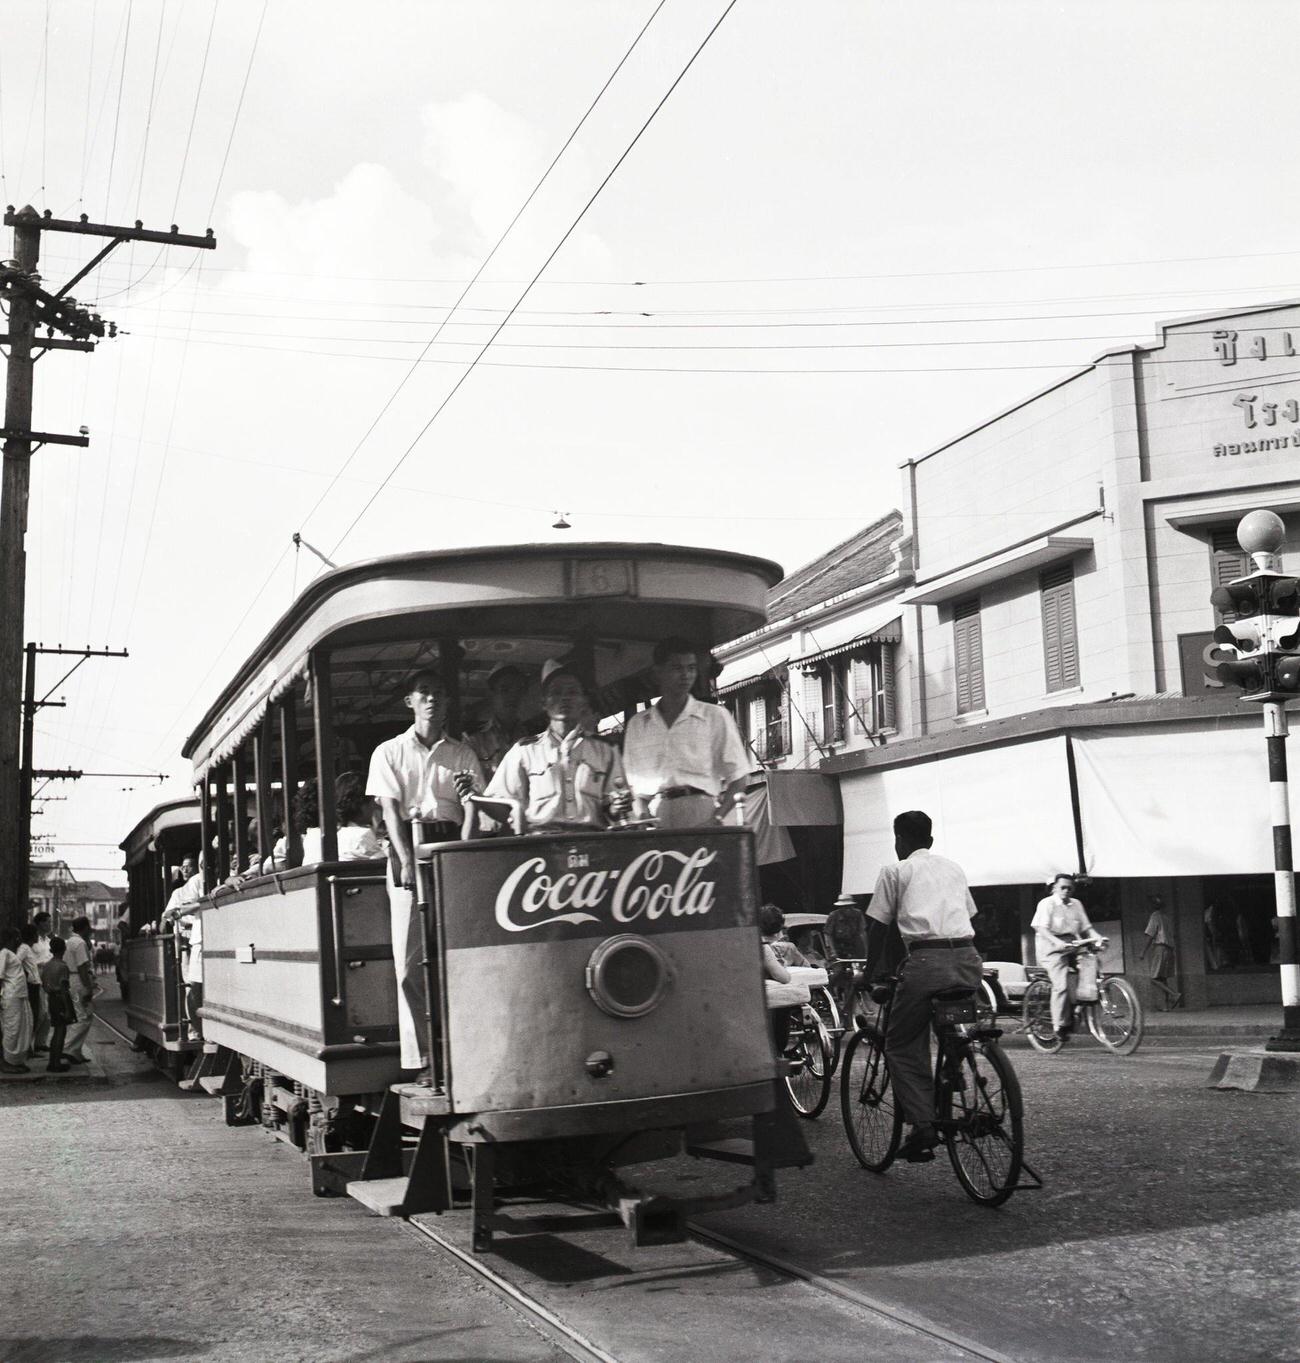 Cyclists pedaling by trolleys advertising an American soft drink in Siam, May 26, 1950.